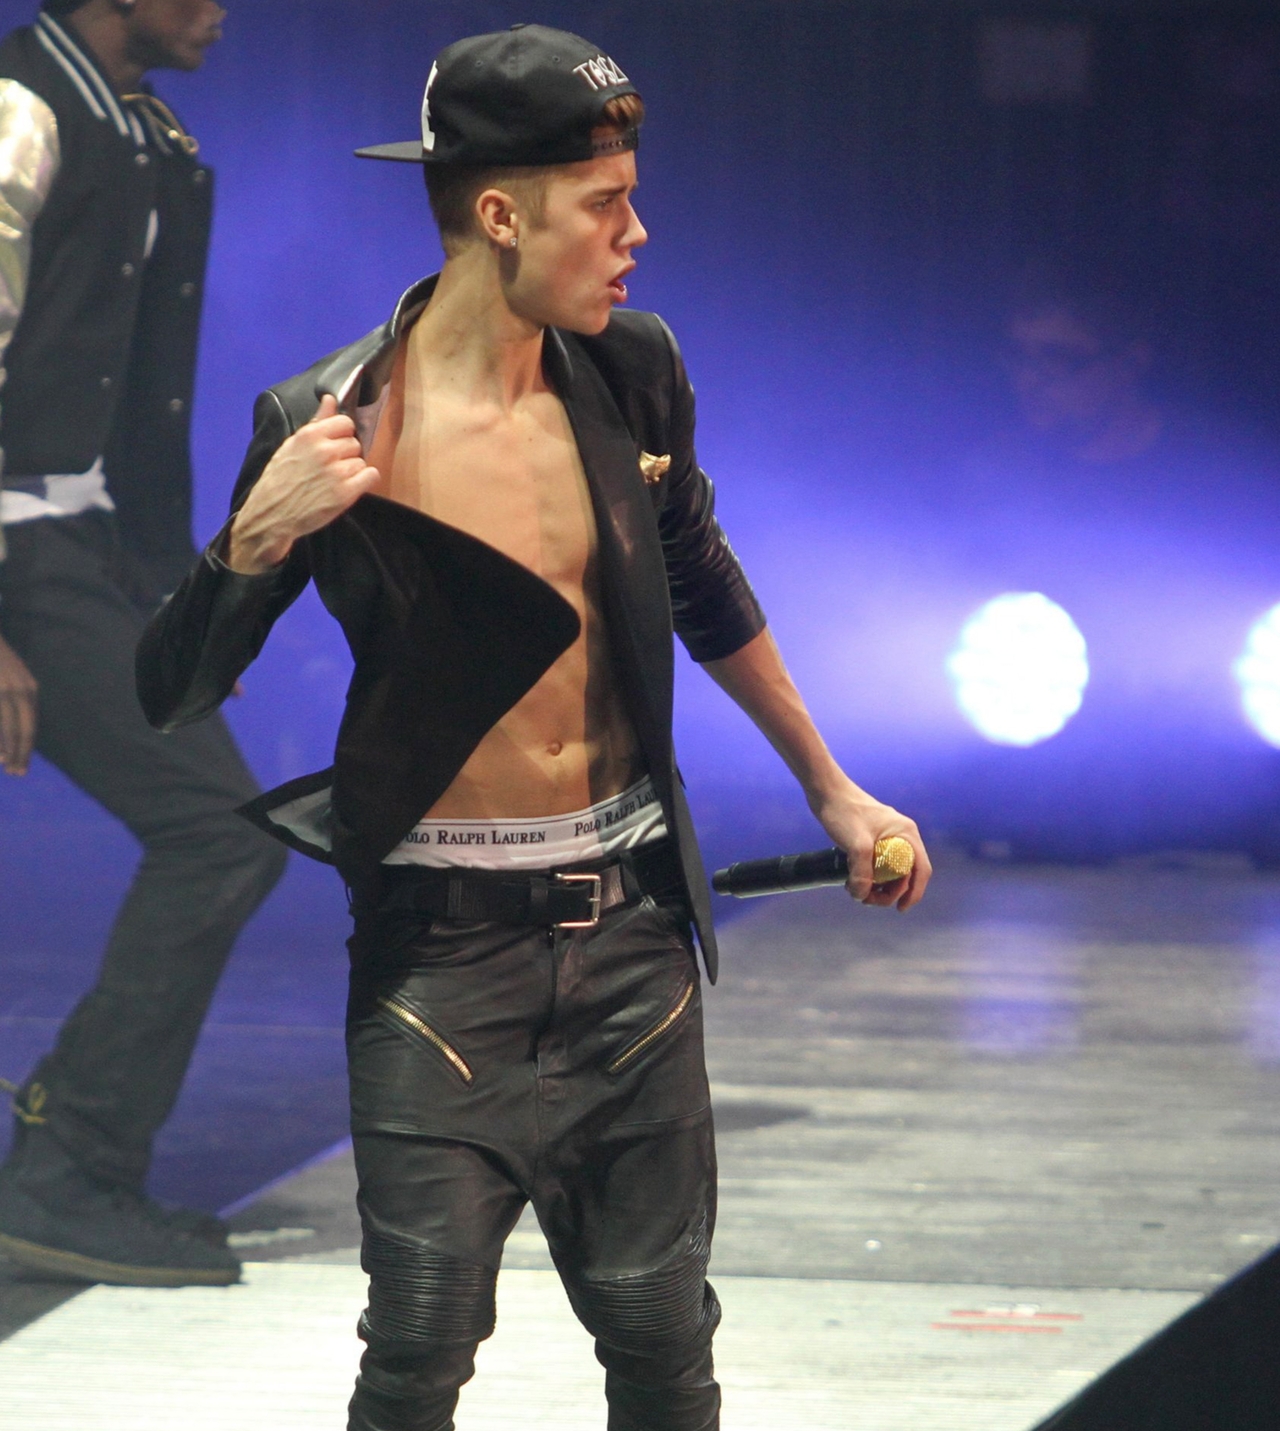 Bieber Exclusive: Justin Bieber Shirtless during Live Performance at MSG, NYC1280 x 1431